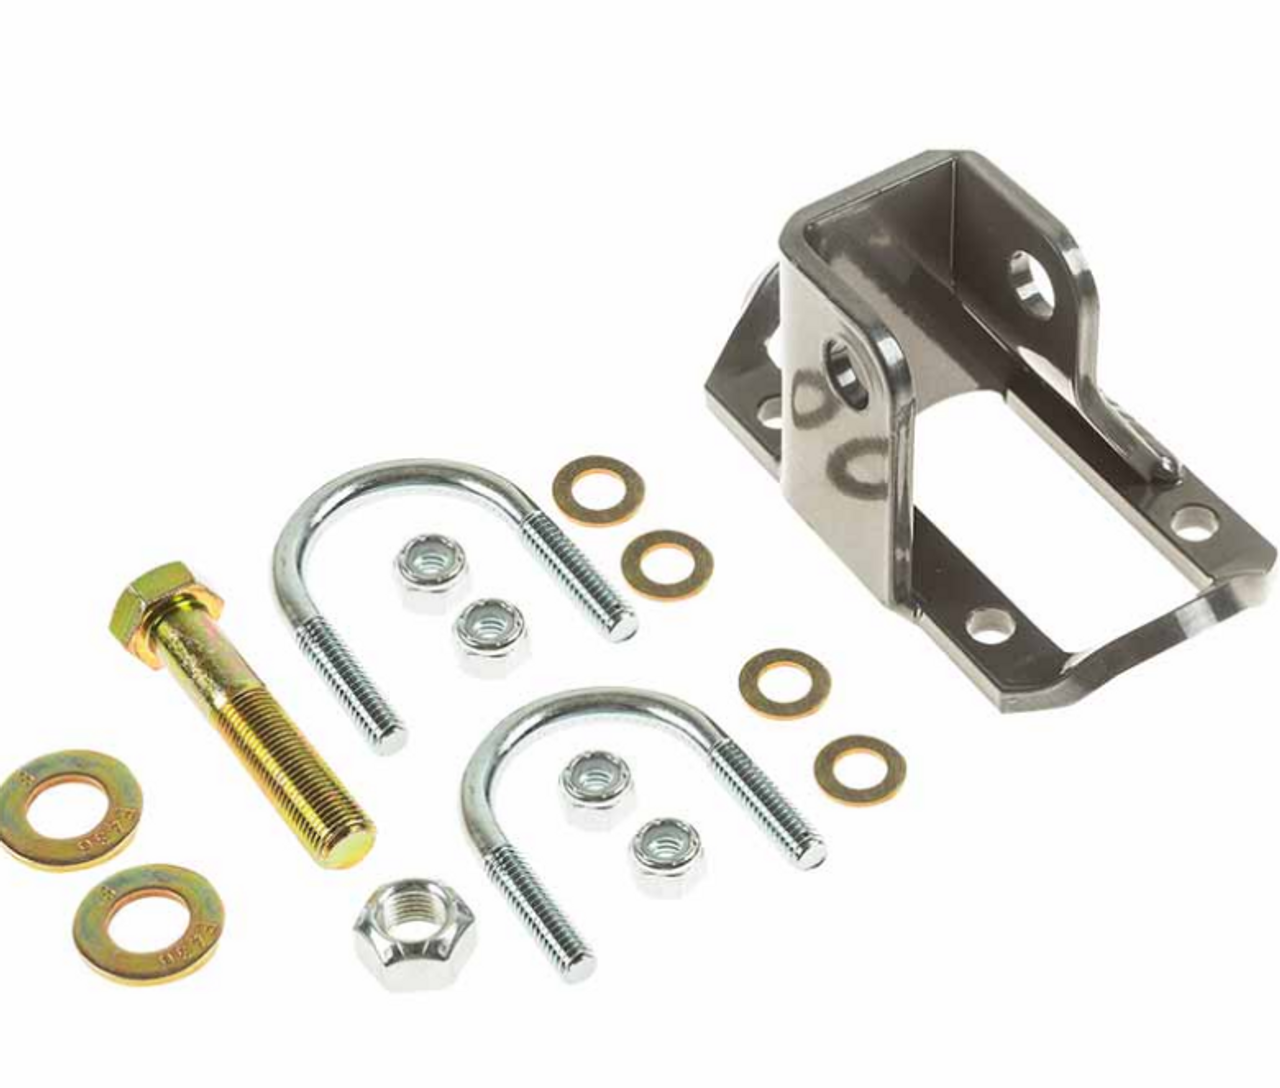  Synergy HEAVY DUTY Steering Kit for 2003 to 2013 DODGE RAM 2500/3500 4WD (SYN8525-01)This View